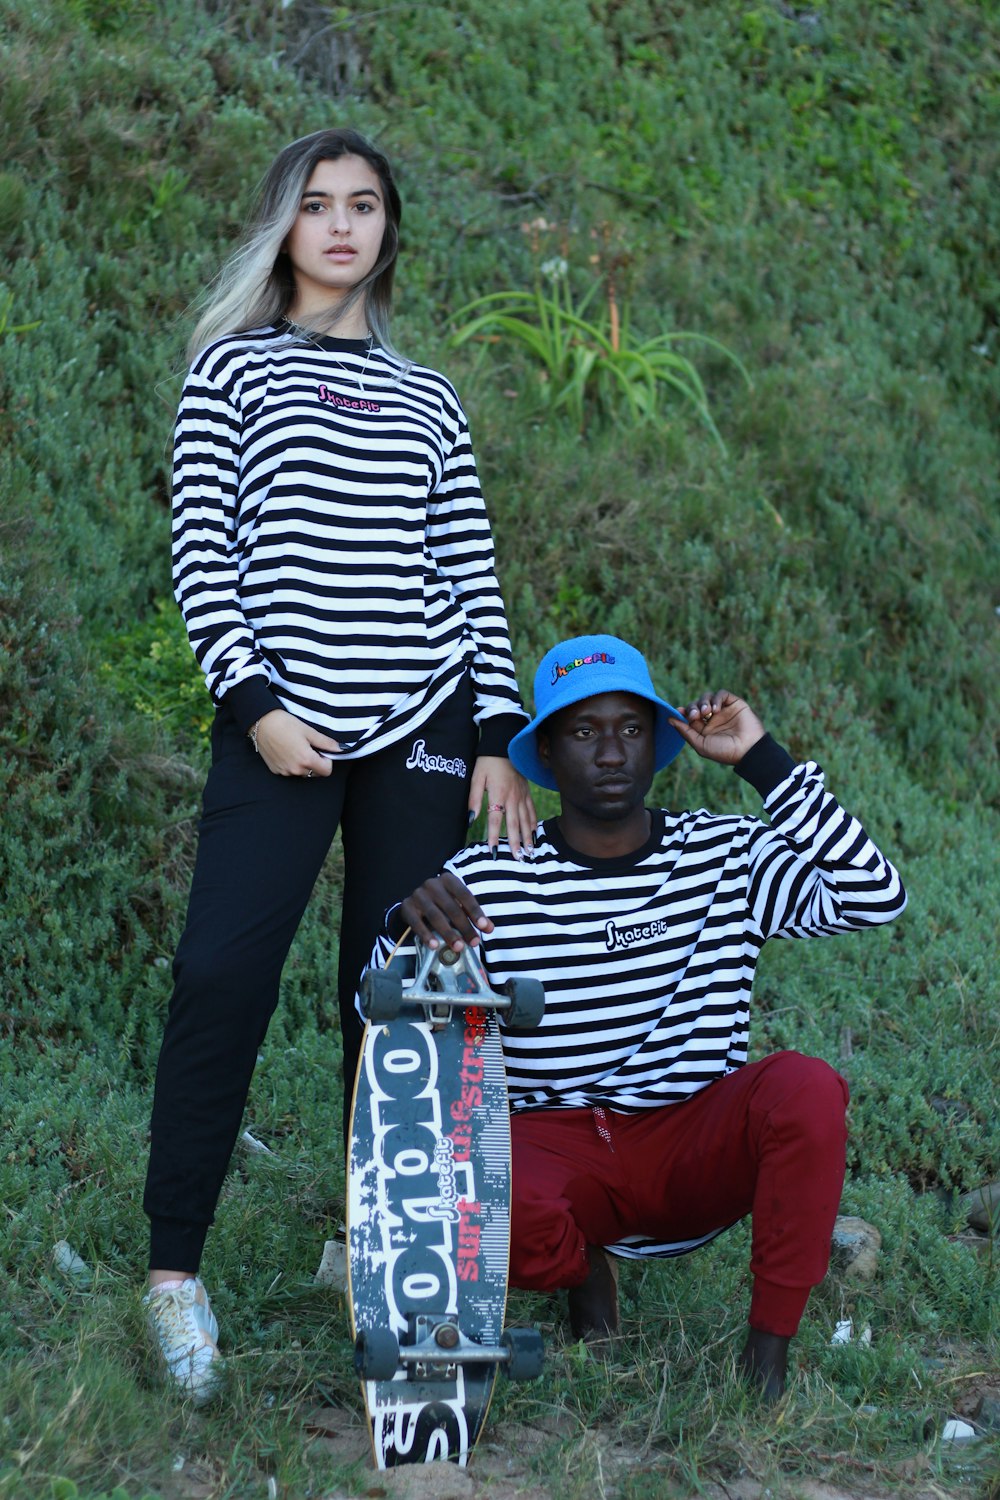 a man and a woman posing with a skateboard